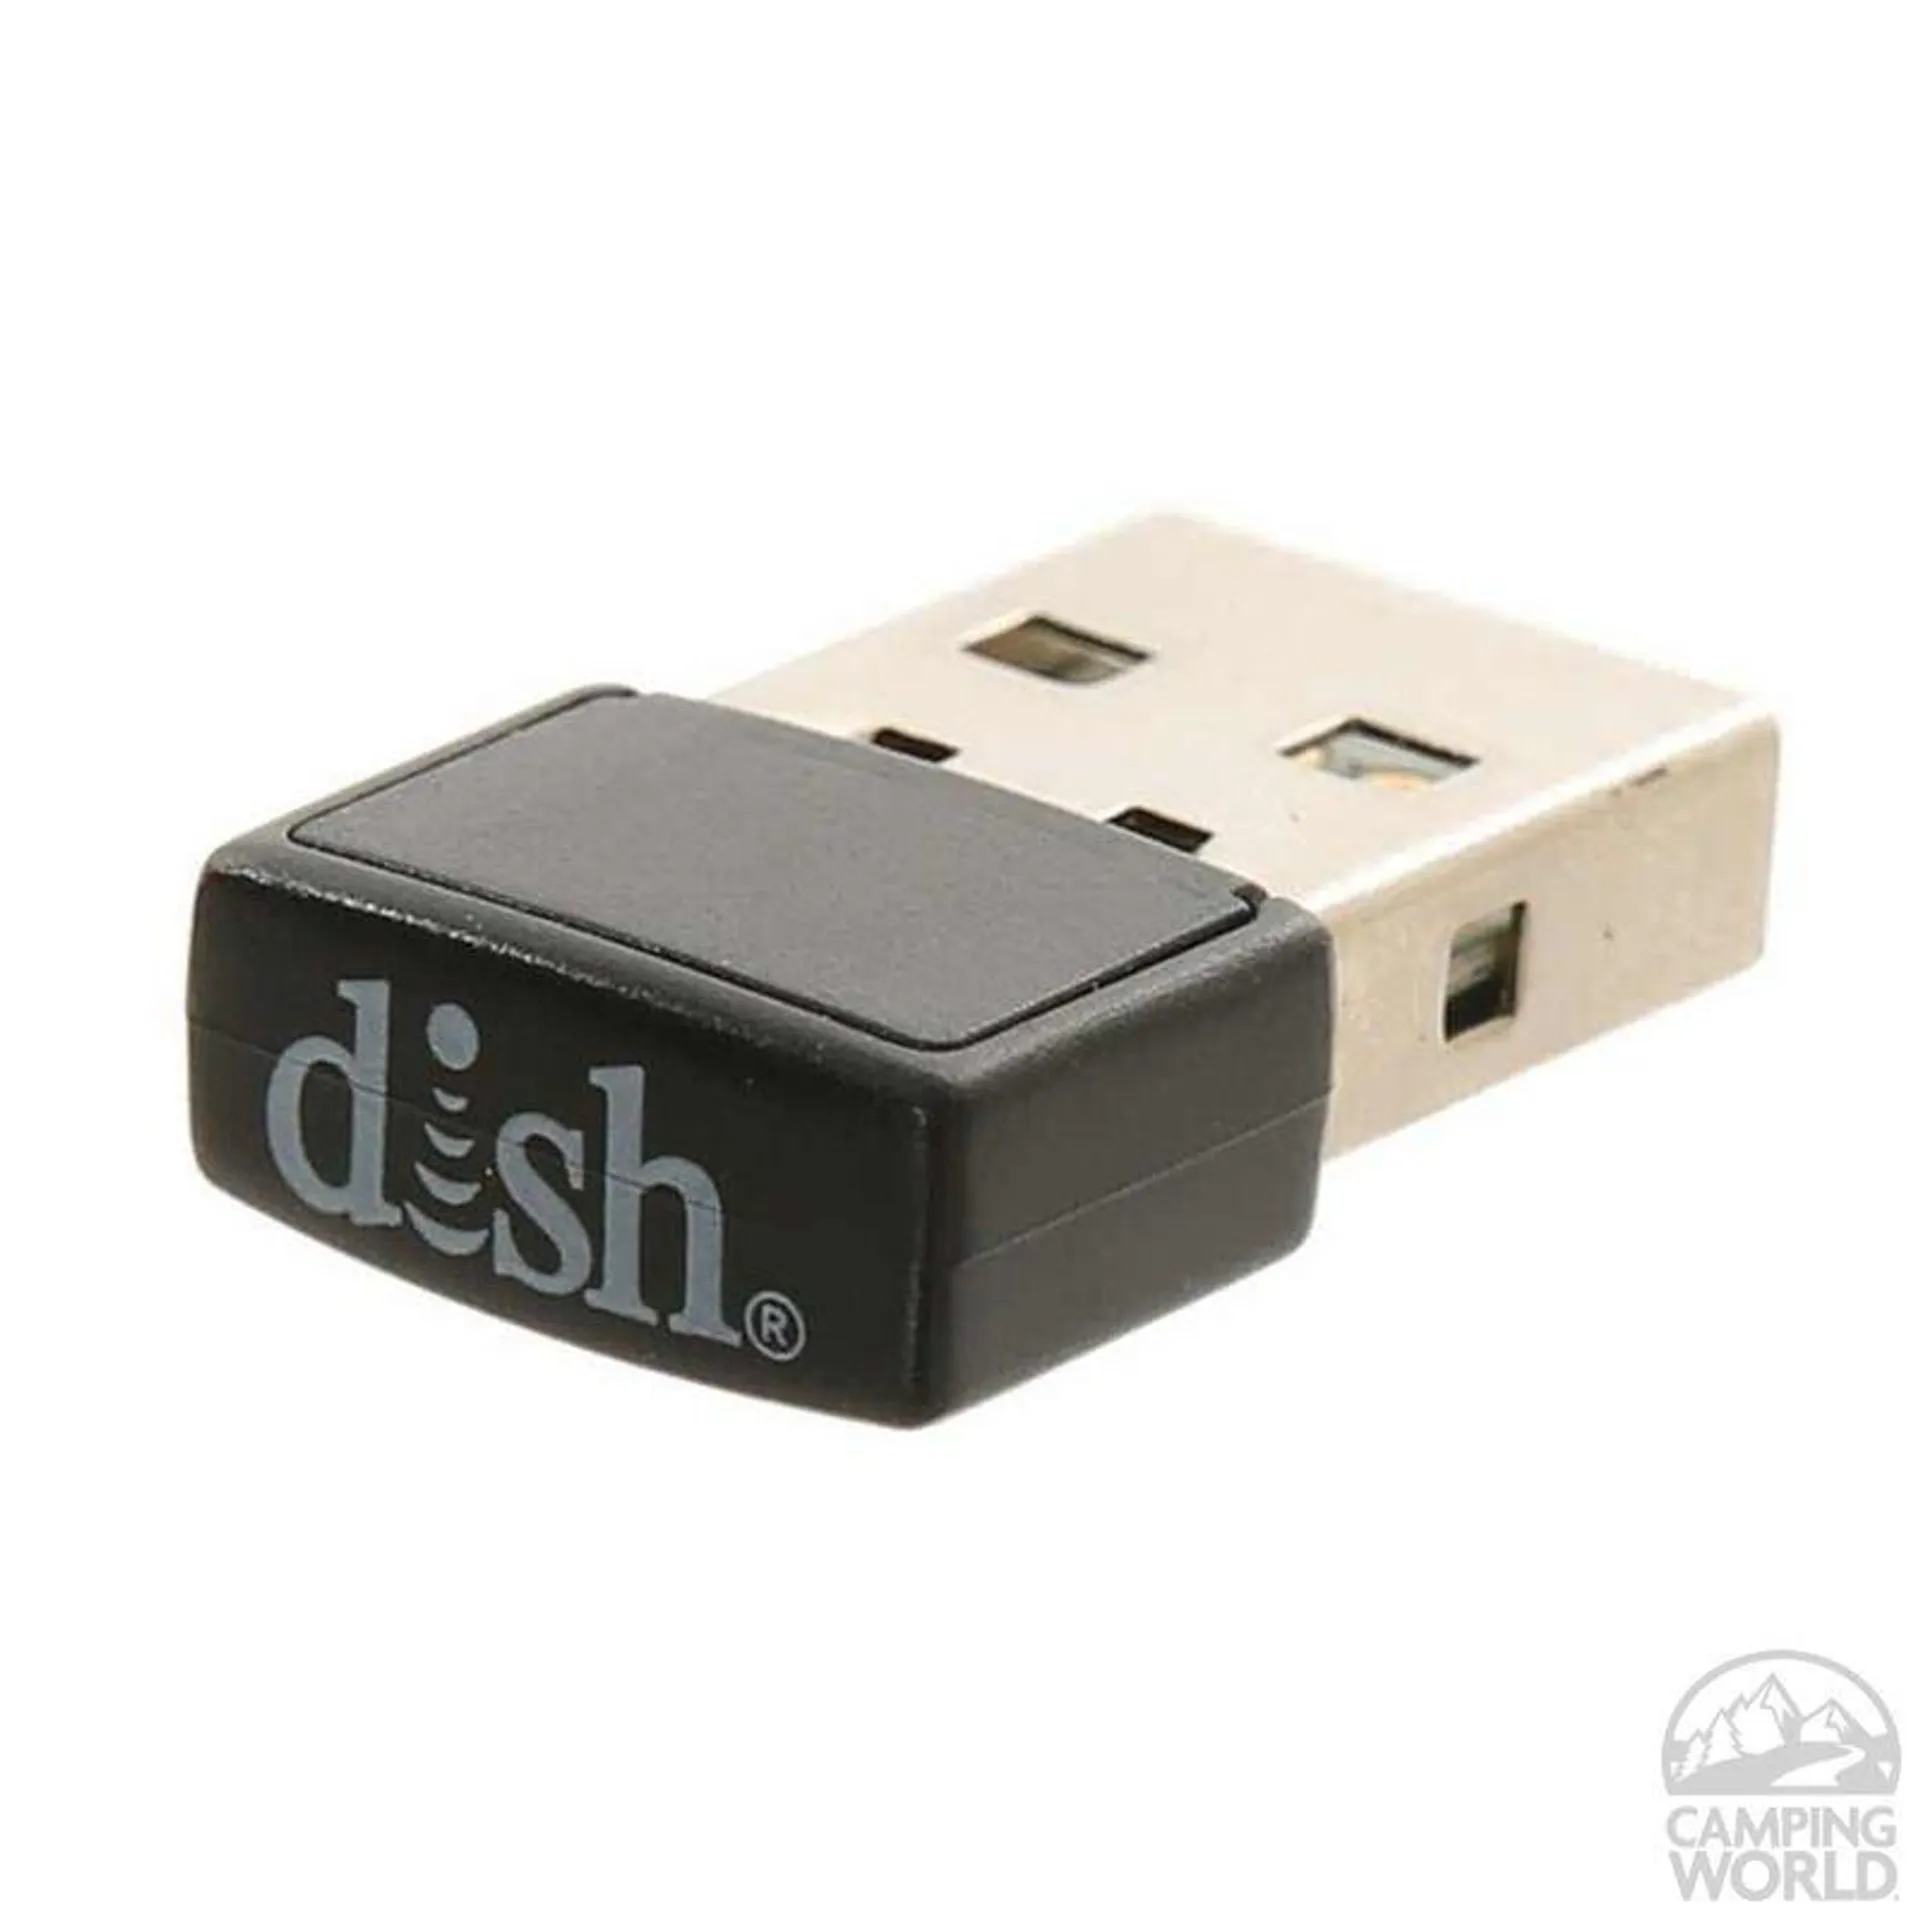 Wally Dish Receiver, Bluetooth Adapter